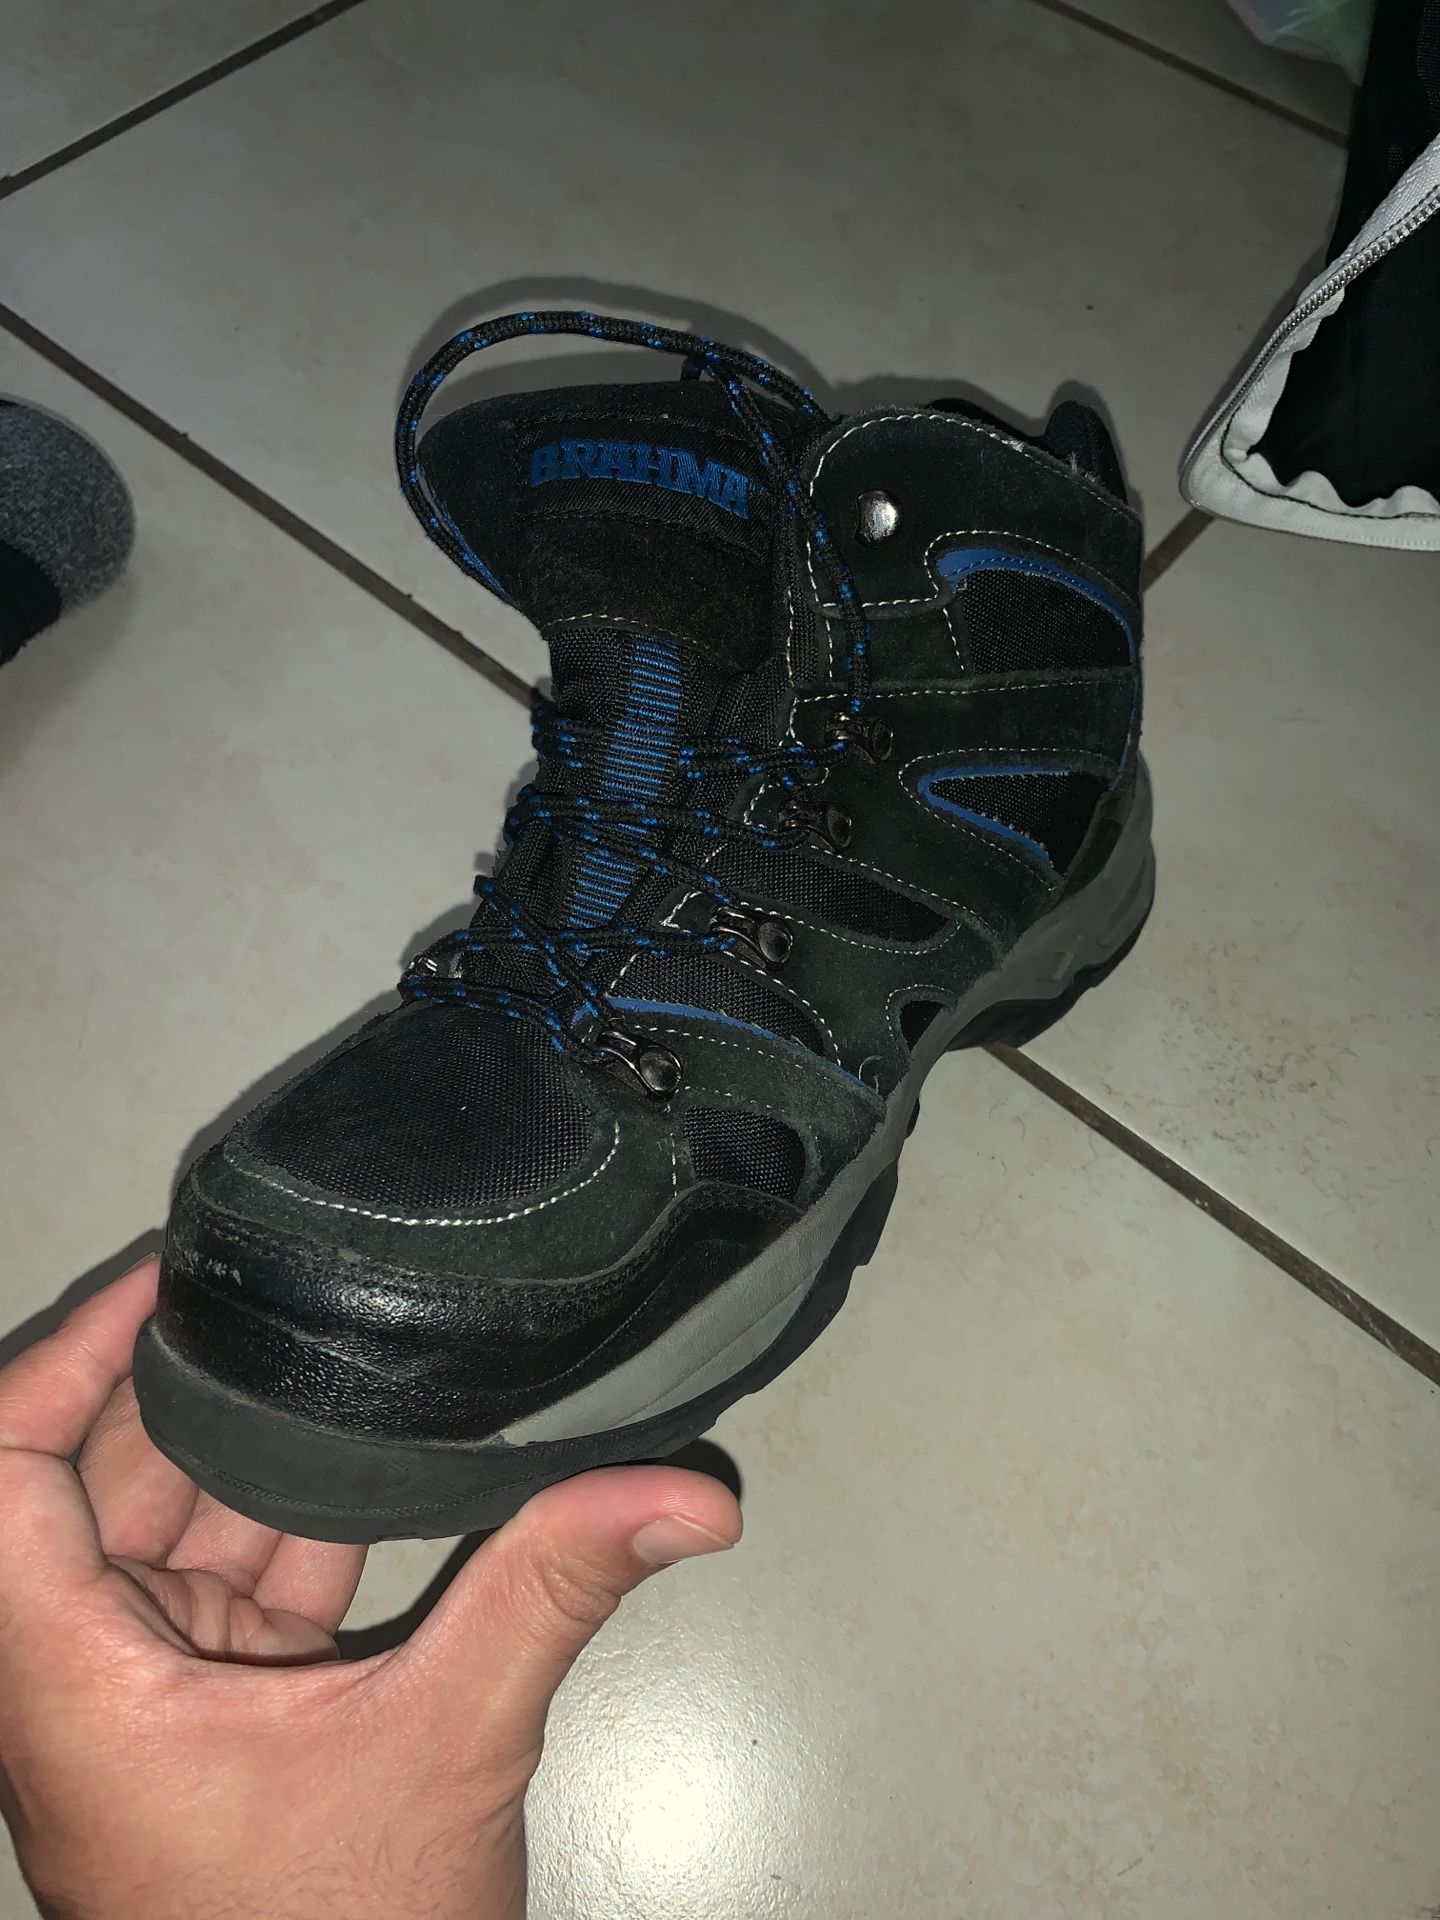 Steel toe boots for work